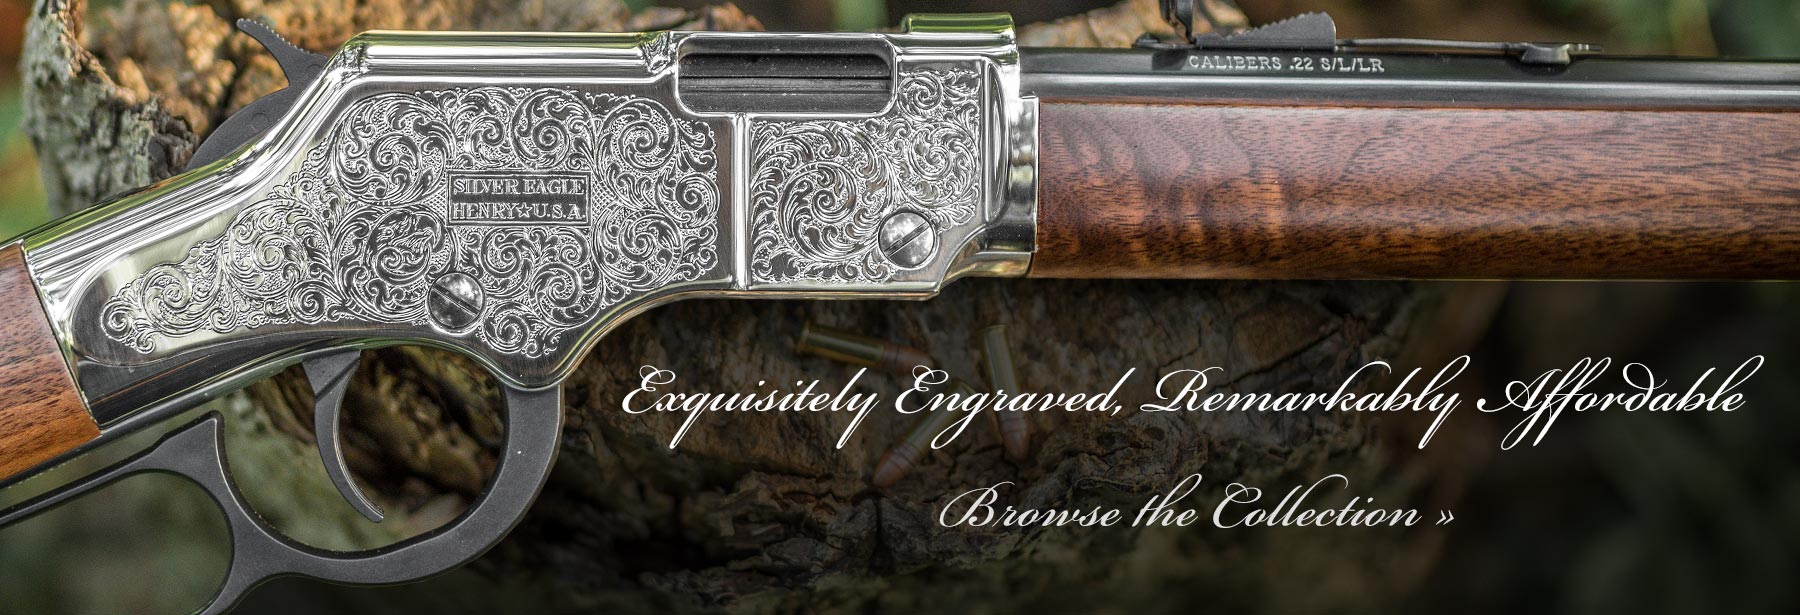 Exquisitely Engraved, Remarkably Affordable rifle collection